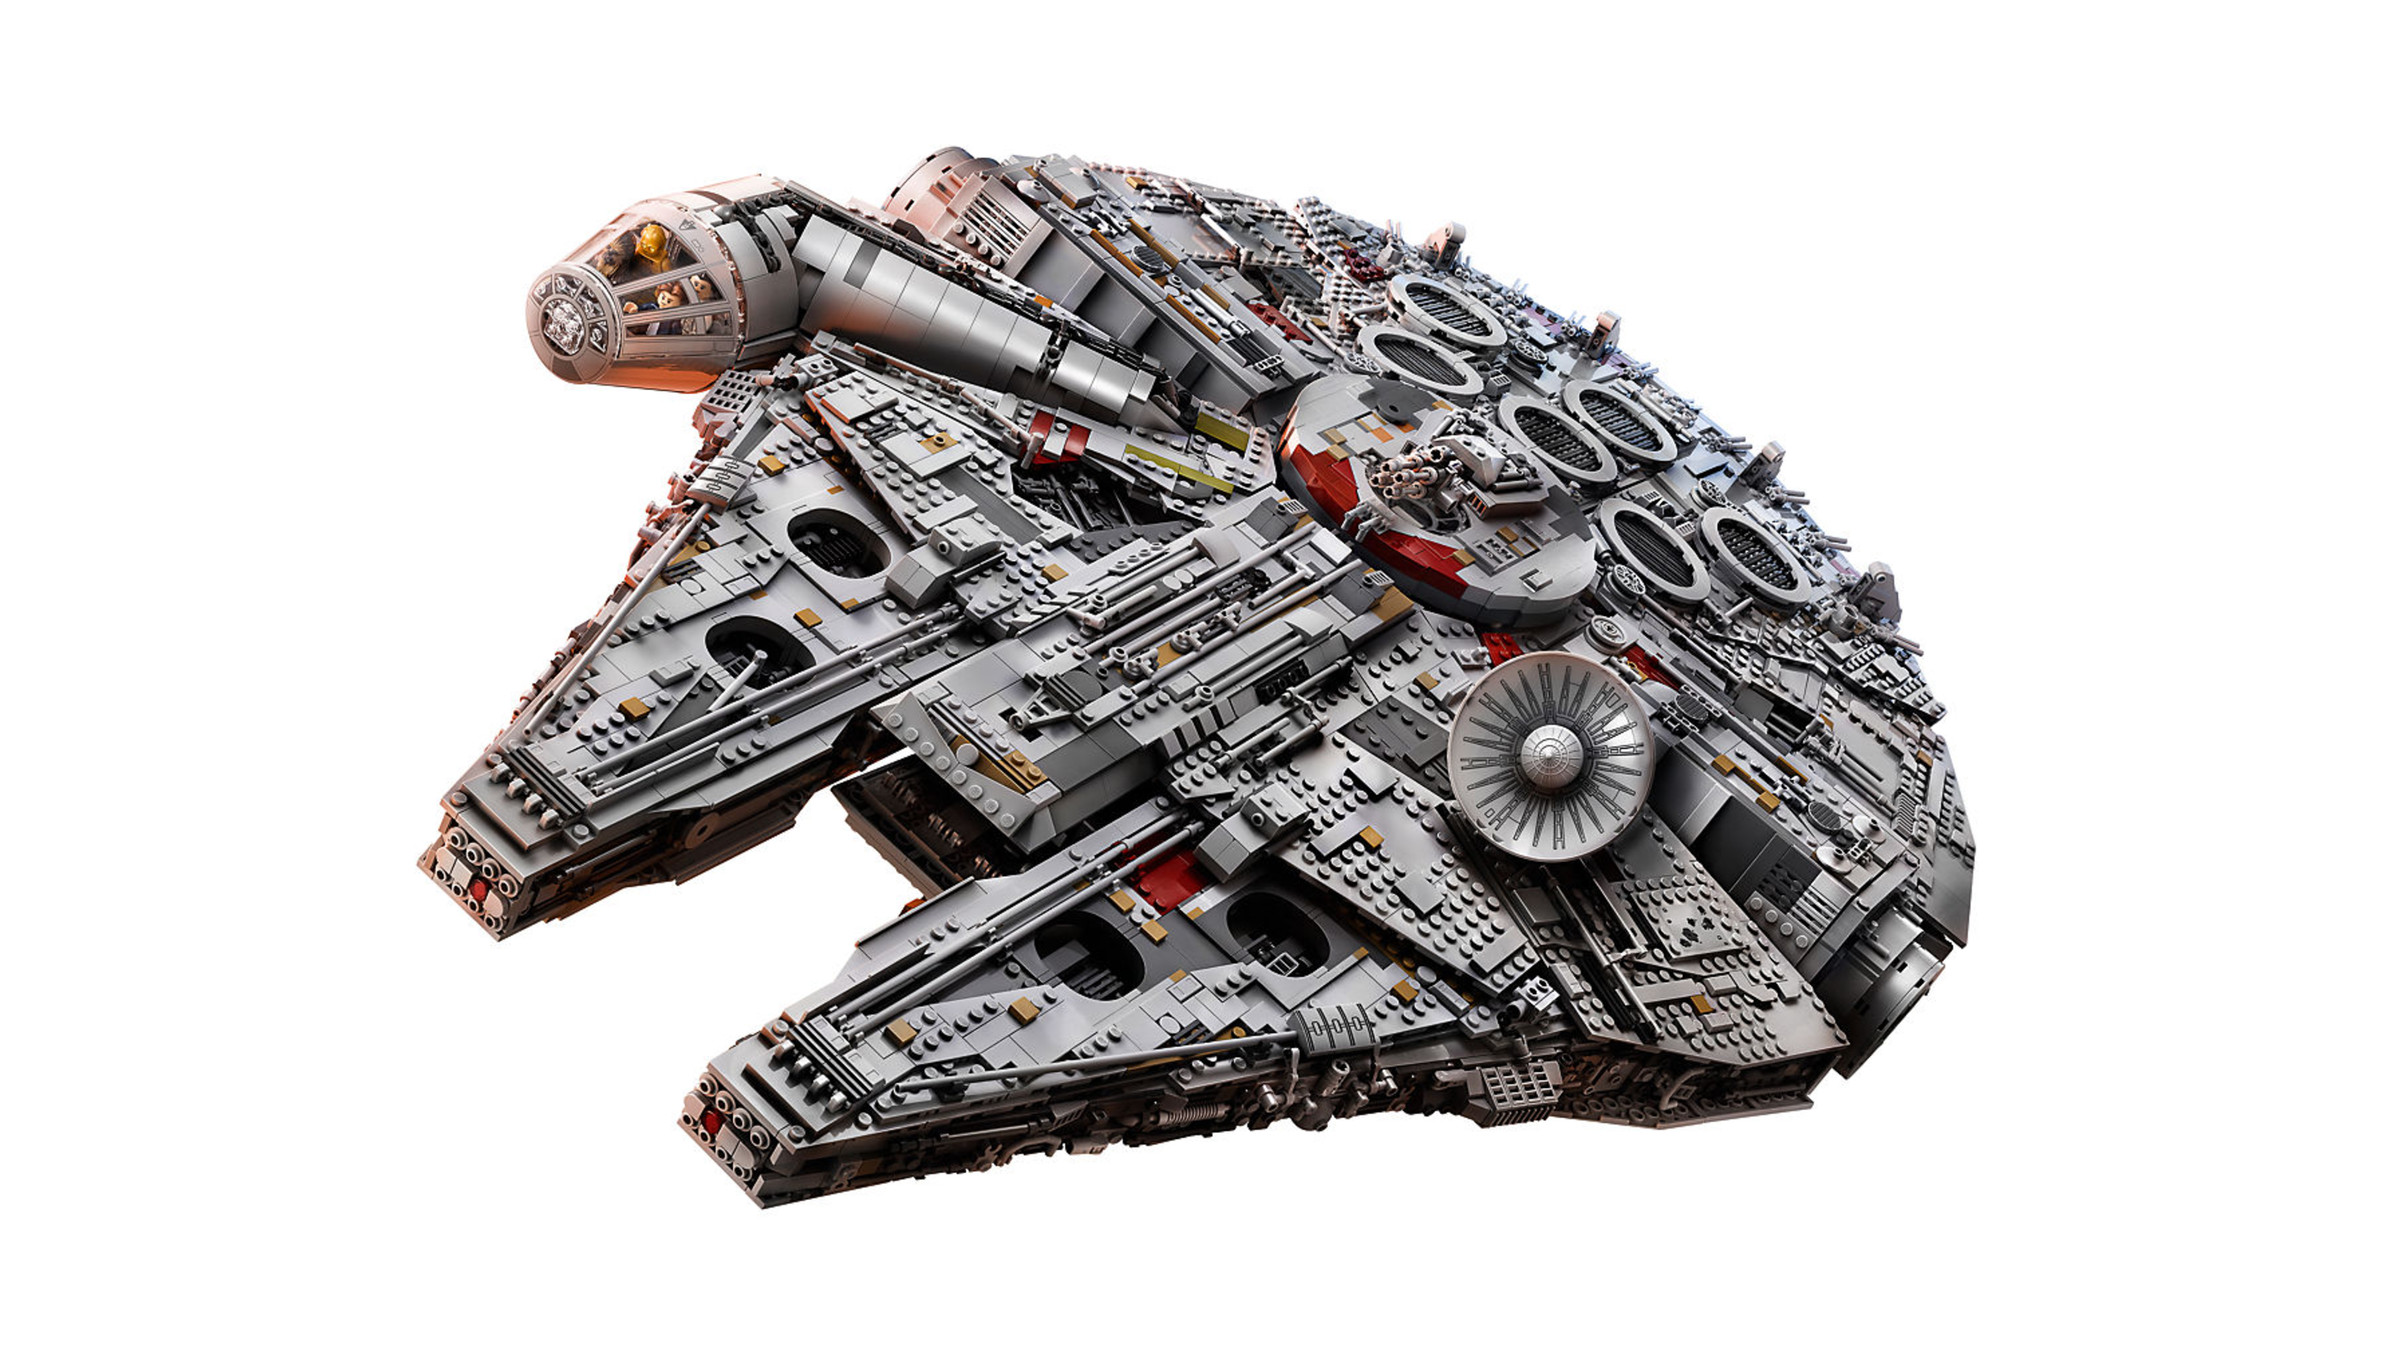 The new 7,541-piece Lego Millennium Falcon is and most expensive set ever - Verge